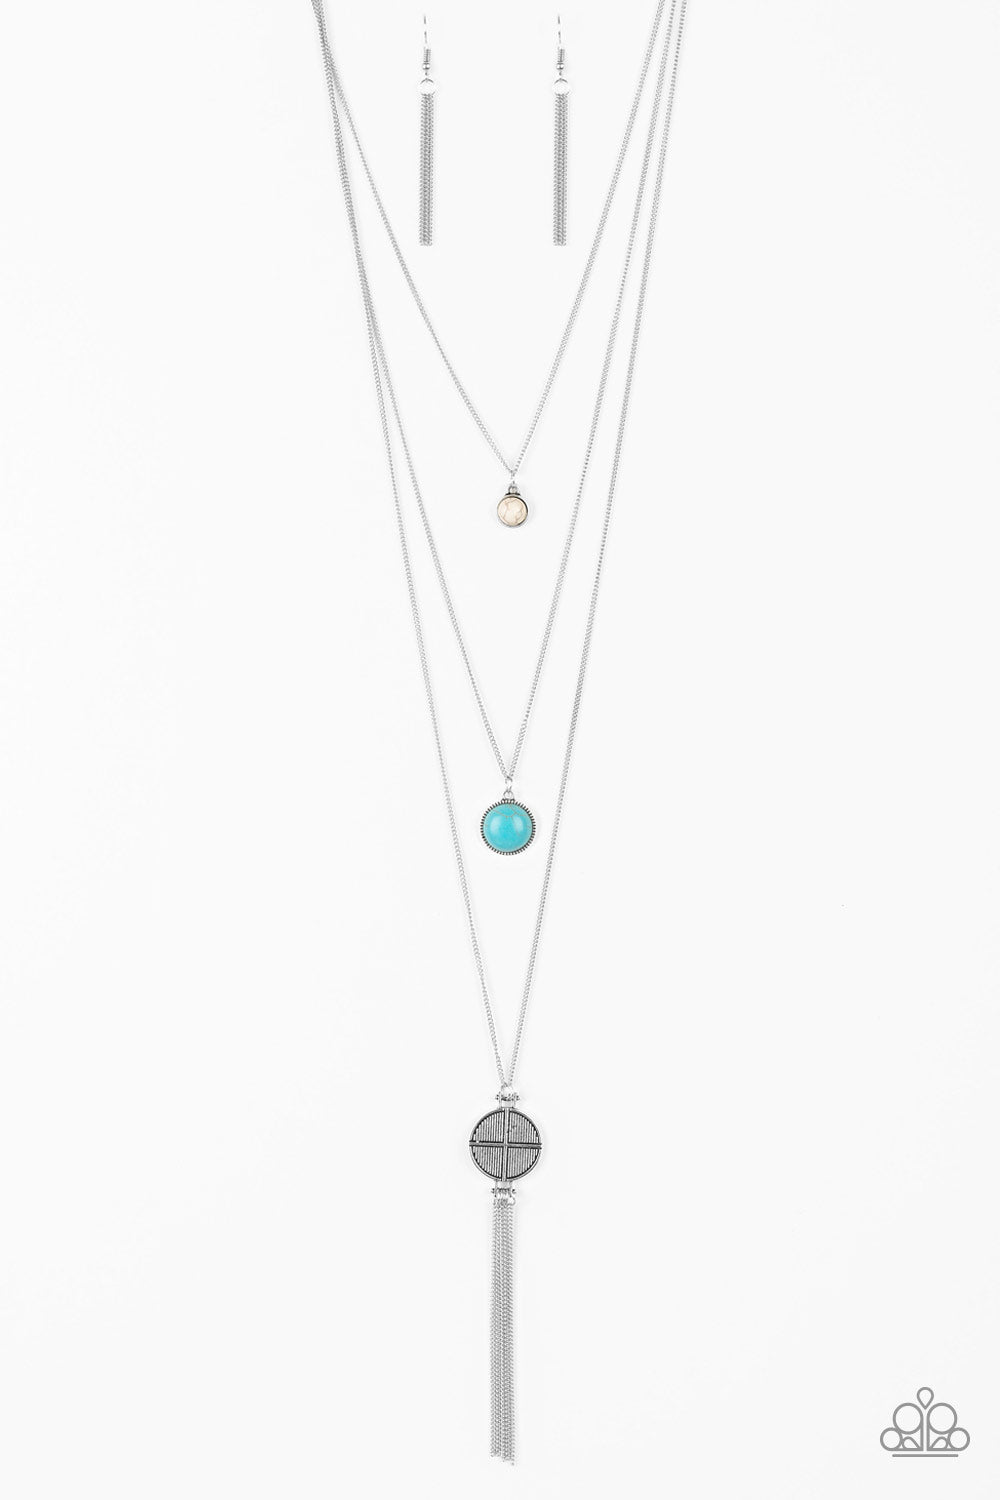 LIFE IS A VOYAGE - MULIT-NECKLACE